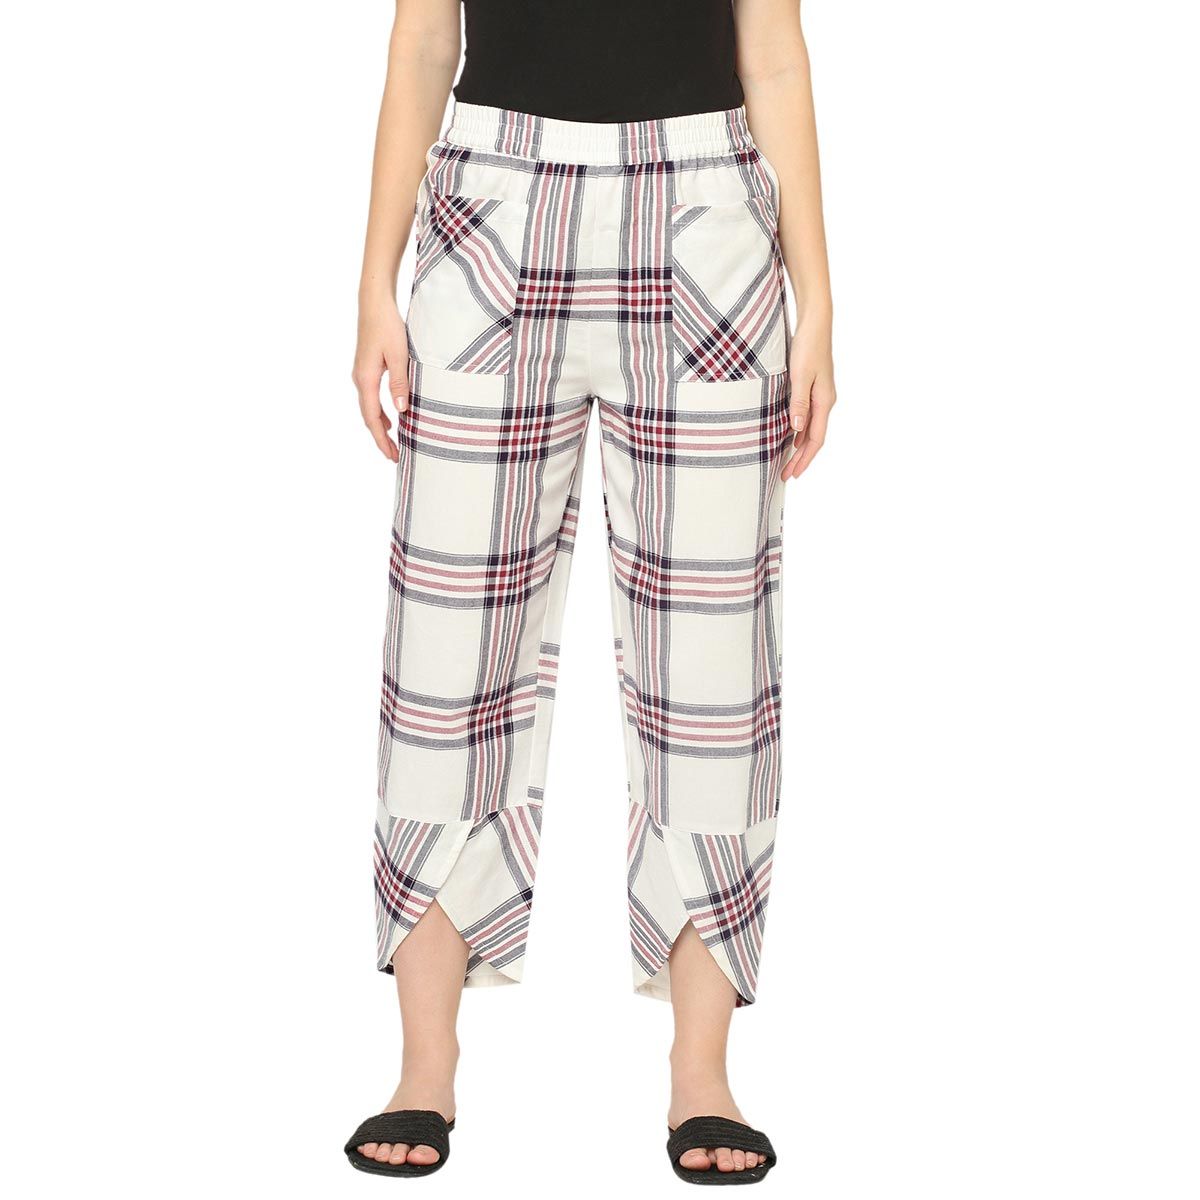 Grey Checked Premium Cotton Lounge Pant Pajama Online In India Color Grey  SizeShirt M